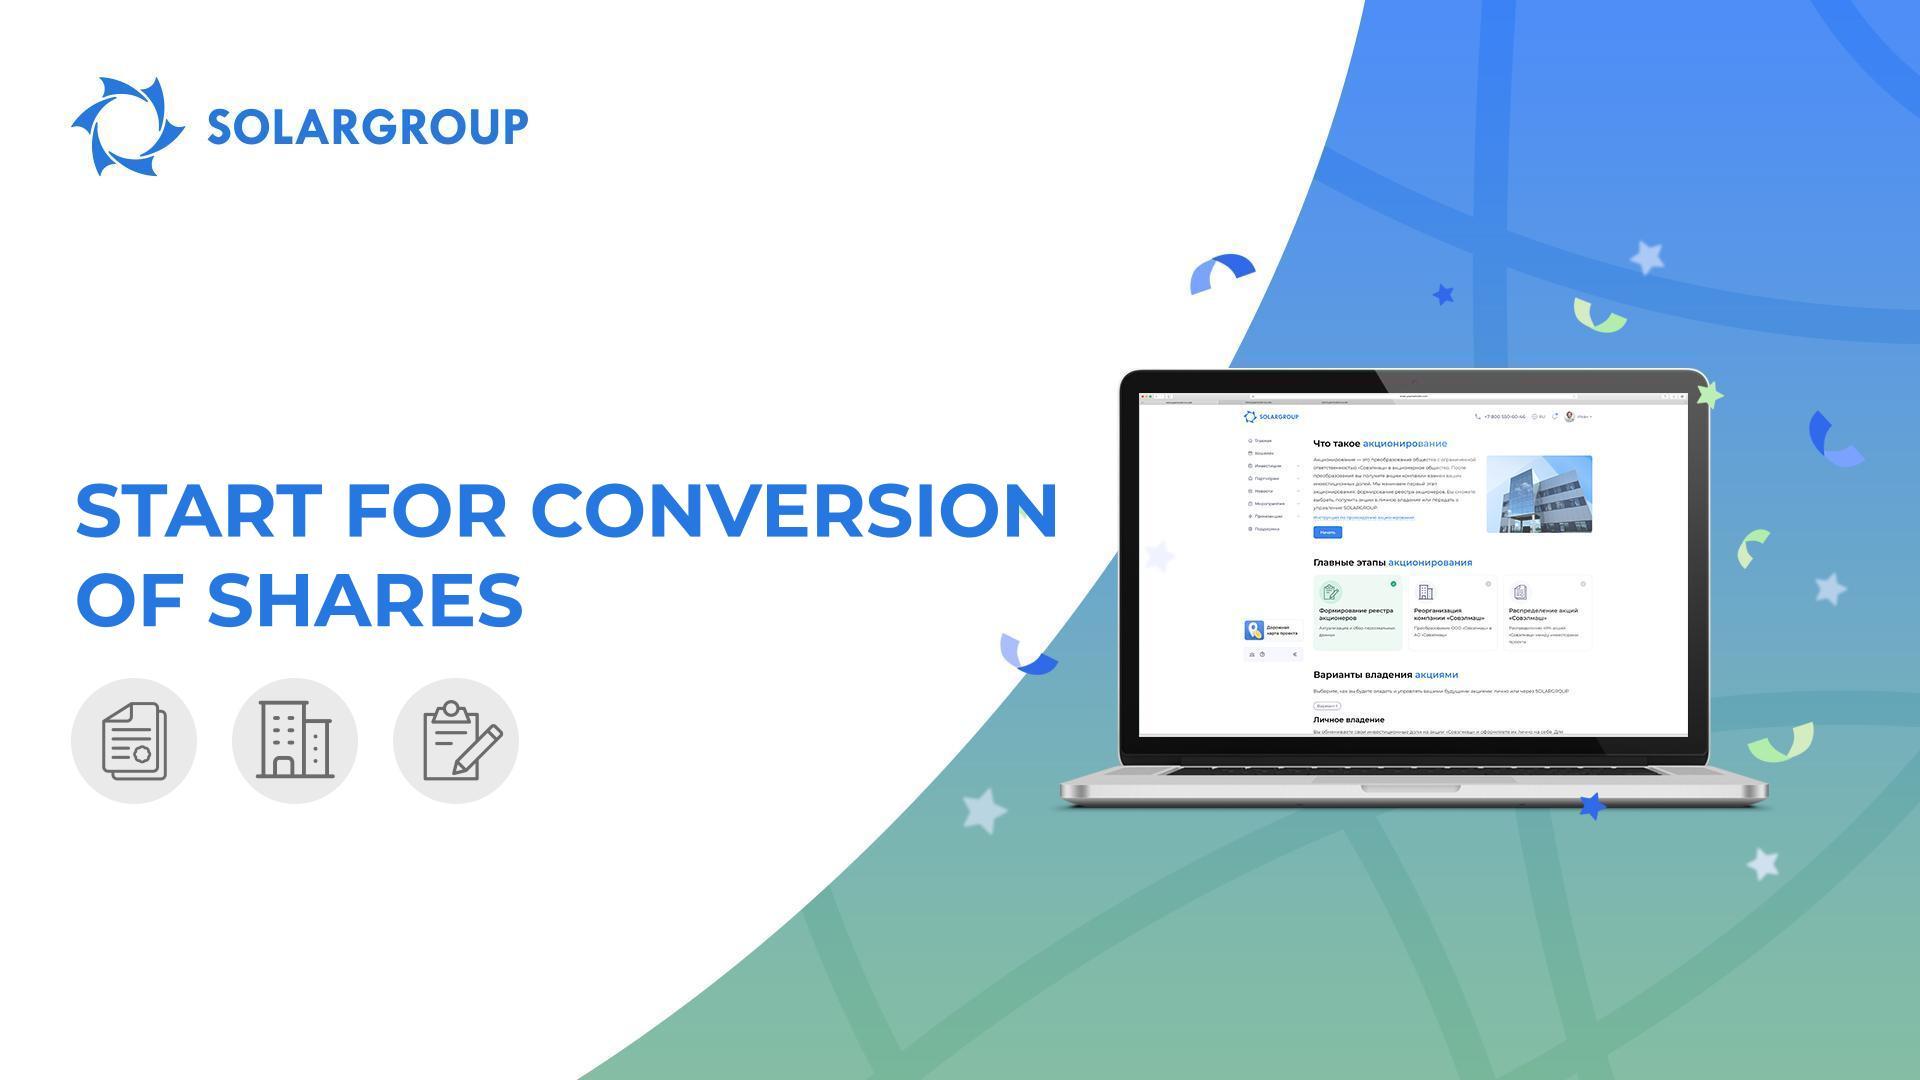 The features for conversion of shares are ready to be launched in the back office